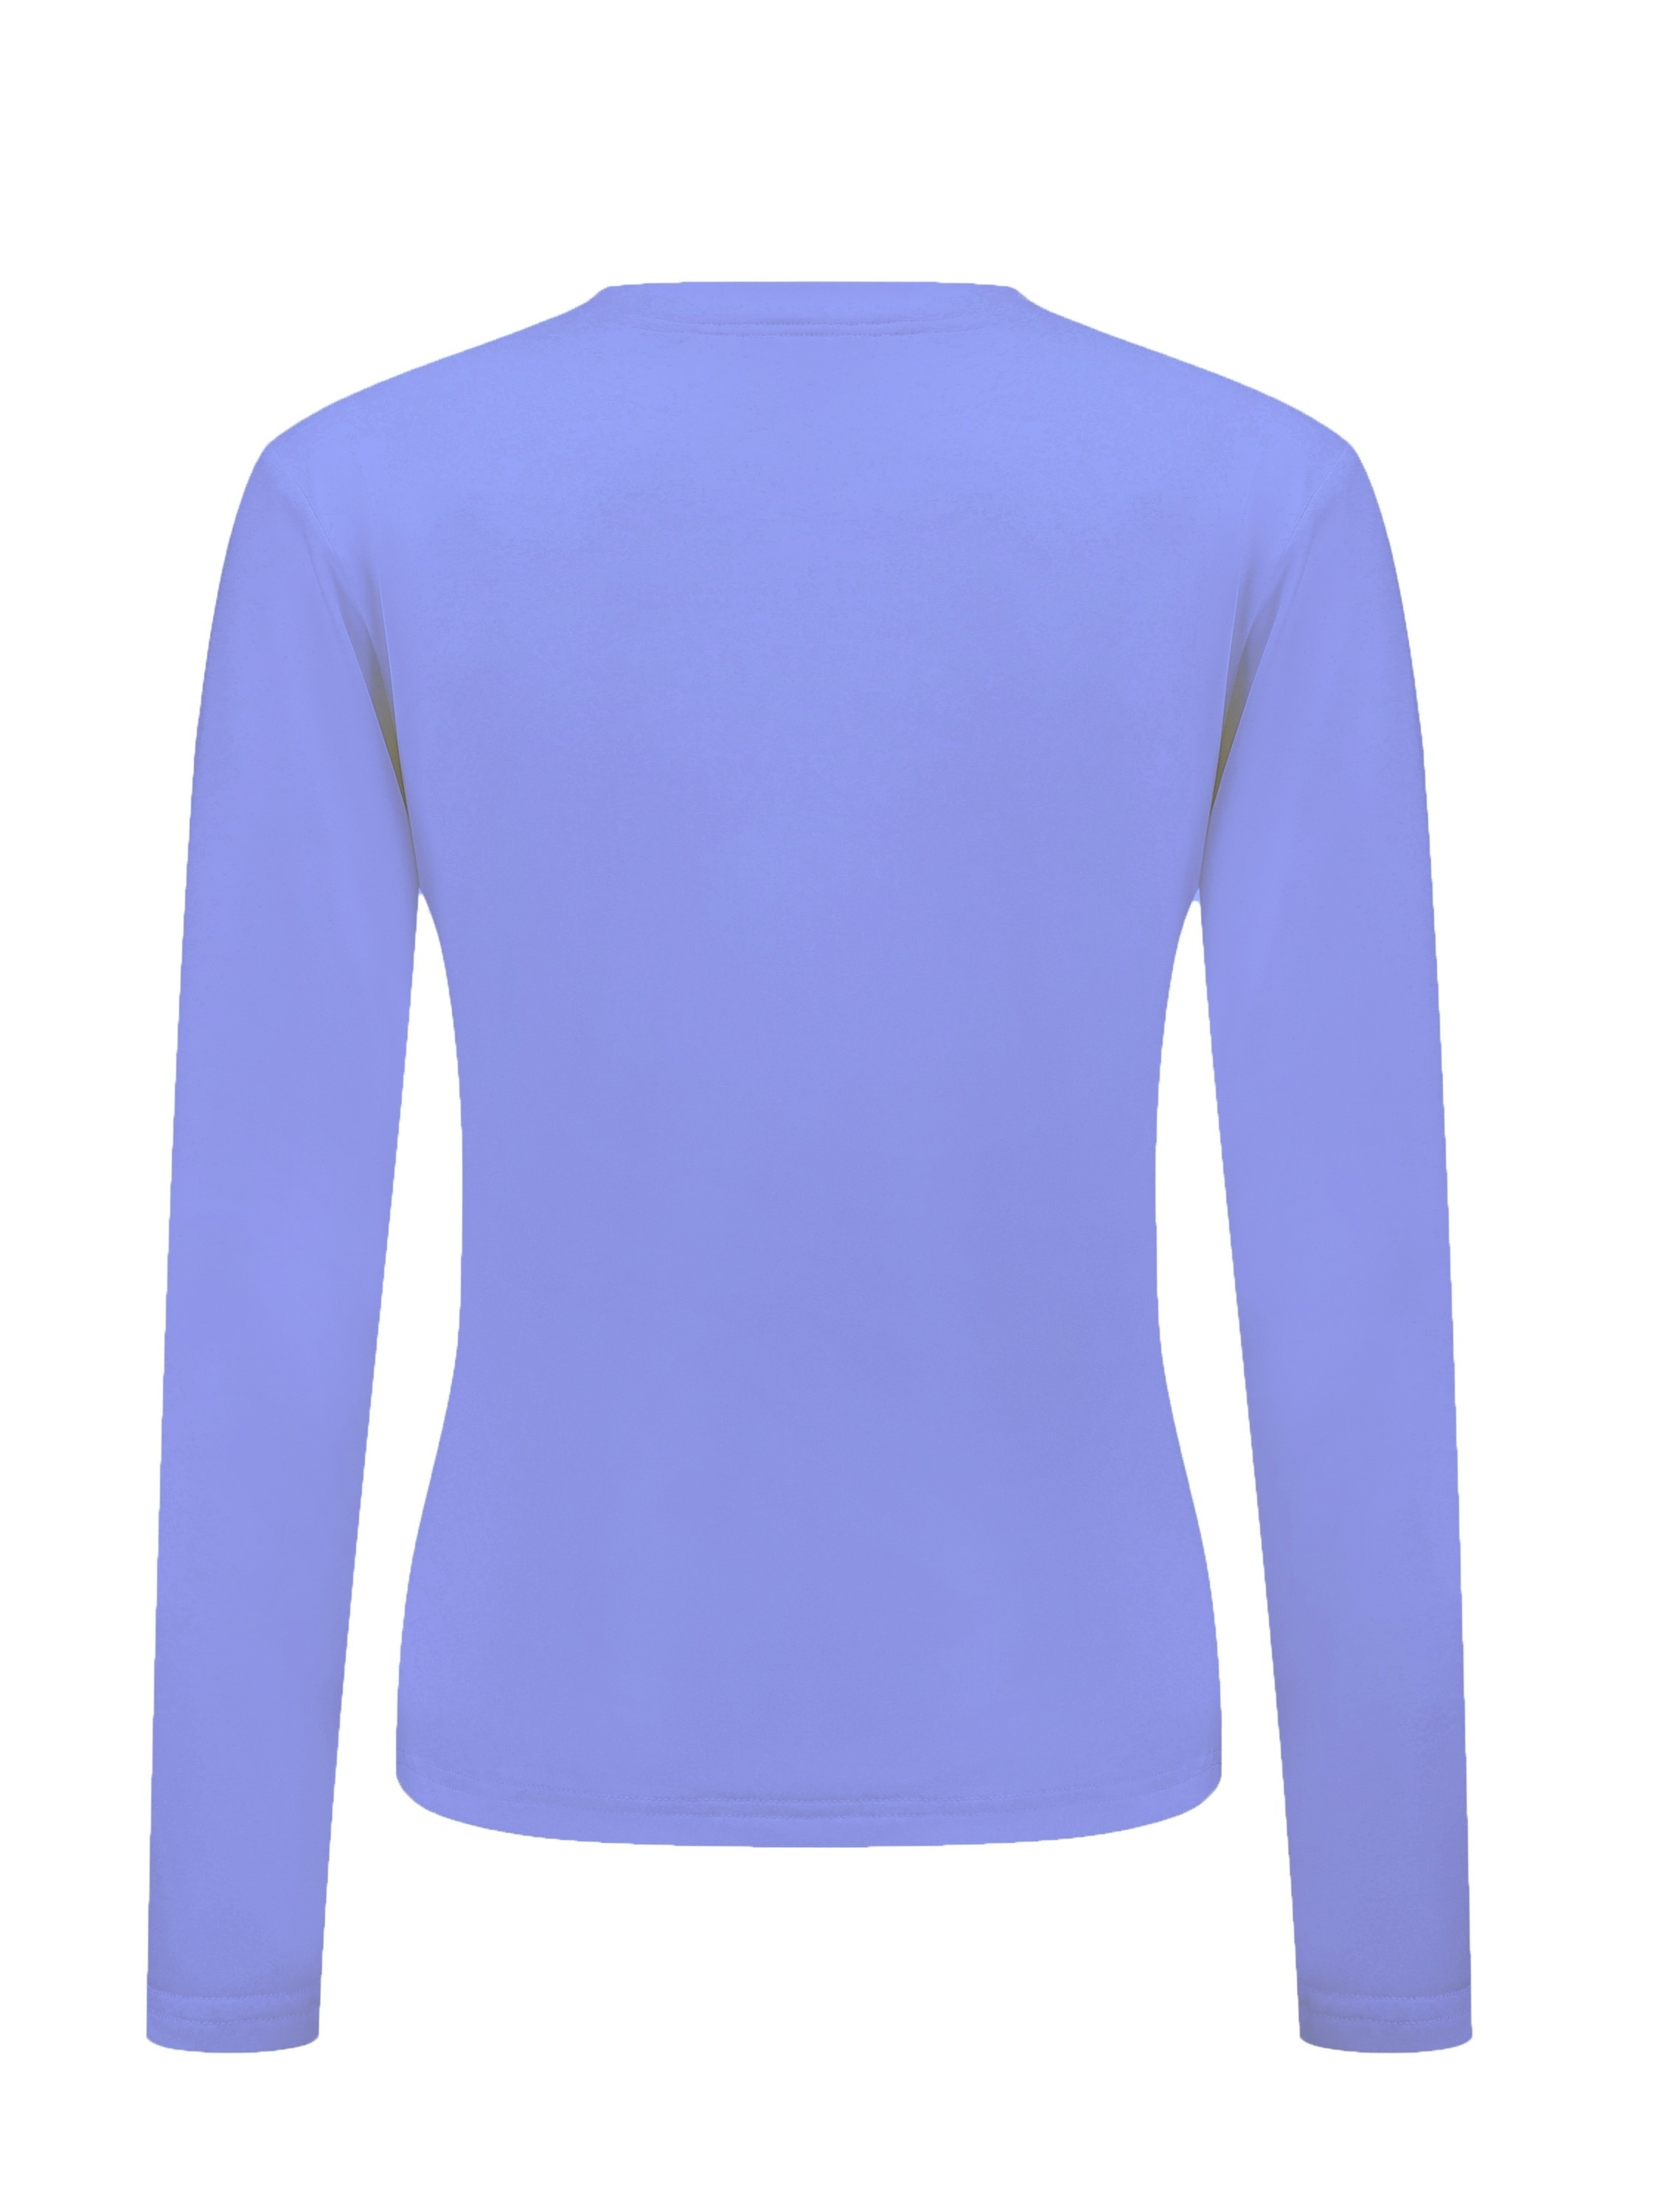 Women Soft Warm Long Sleeve Thermal Tops Round V-Neck Stretch Winter  Undershirts